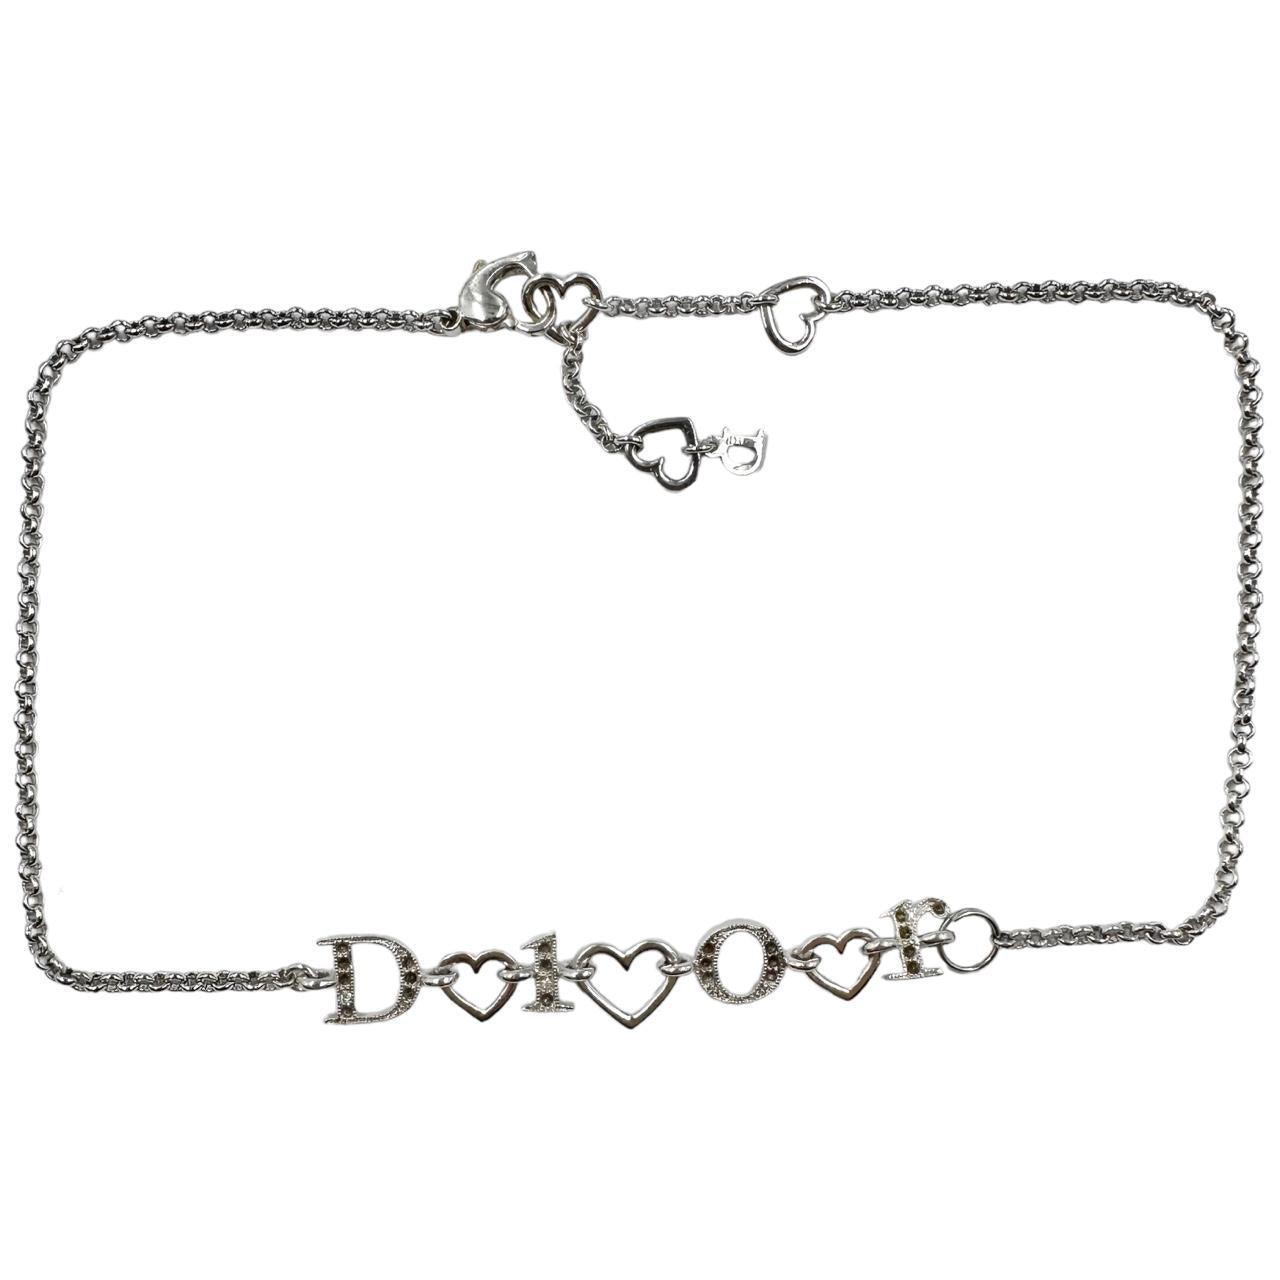 Vintage Dior Heart Chain Necklace - Known Source